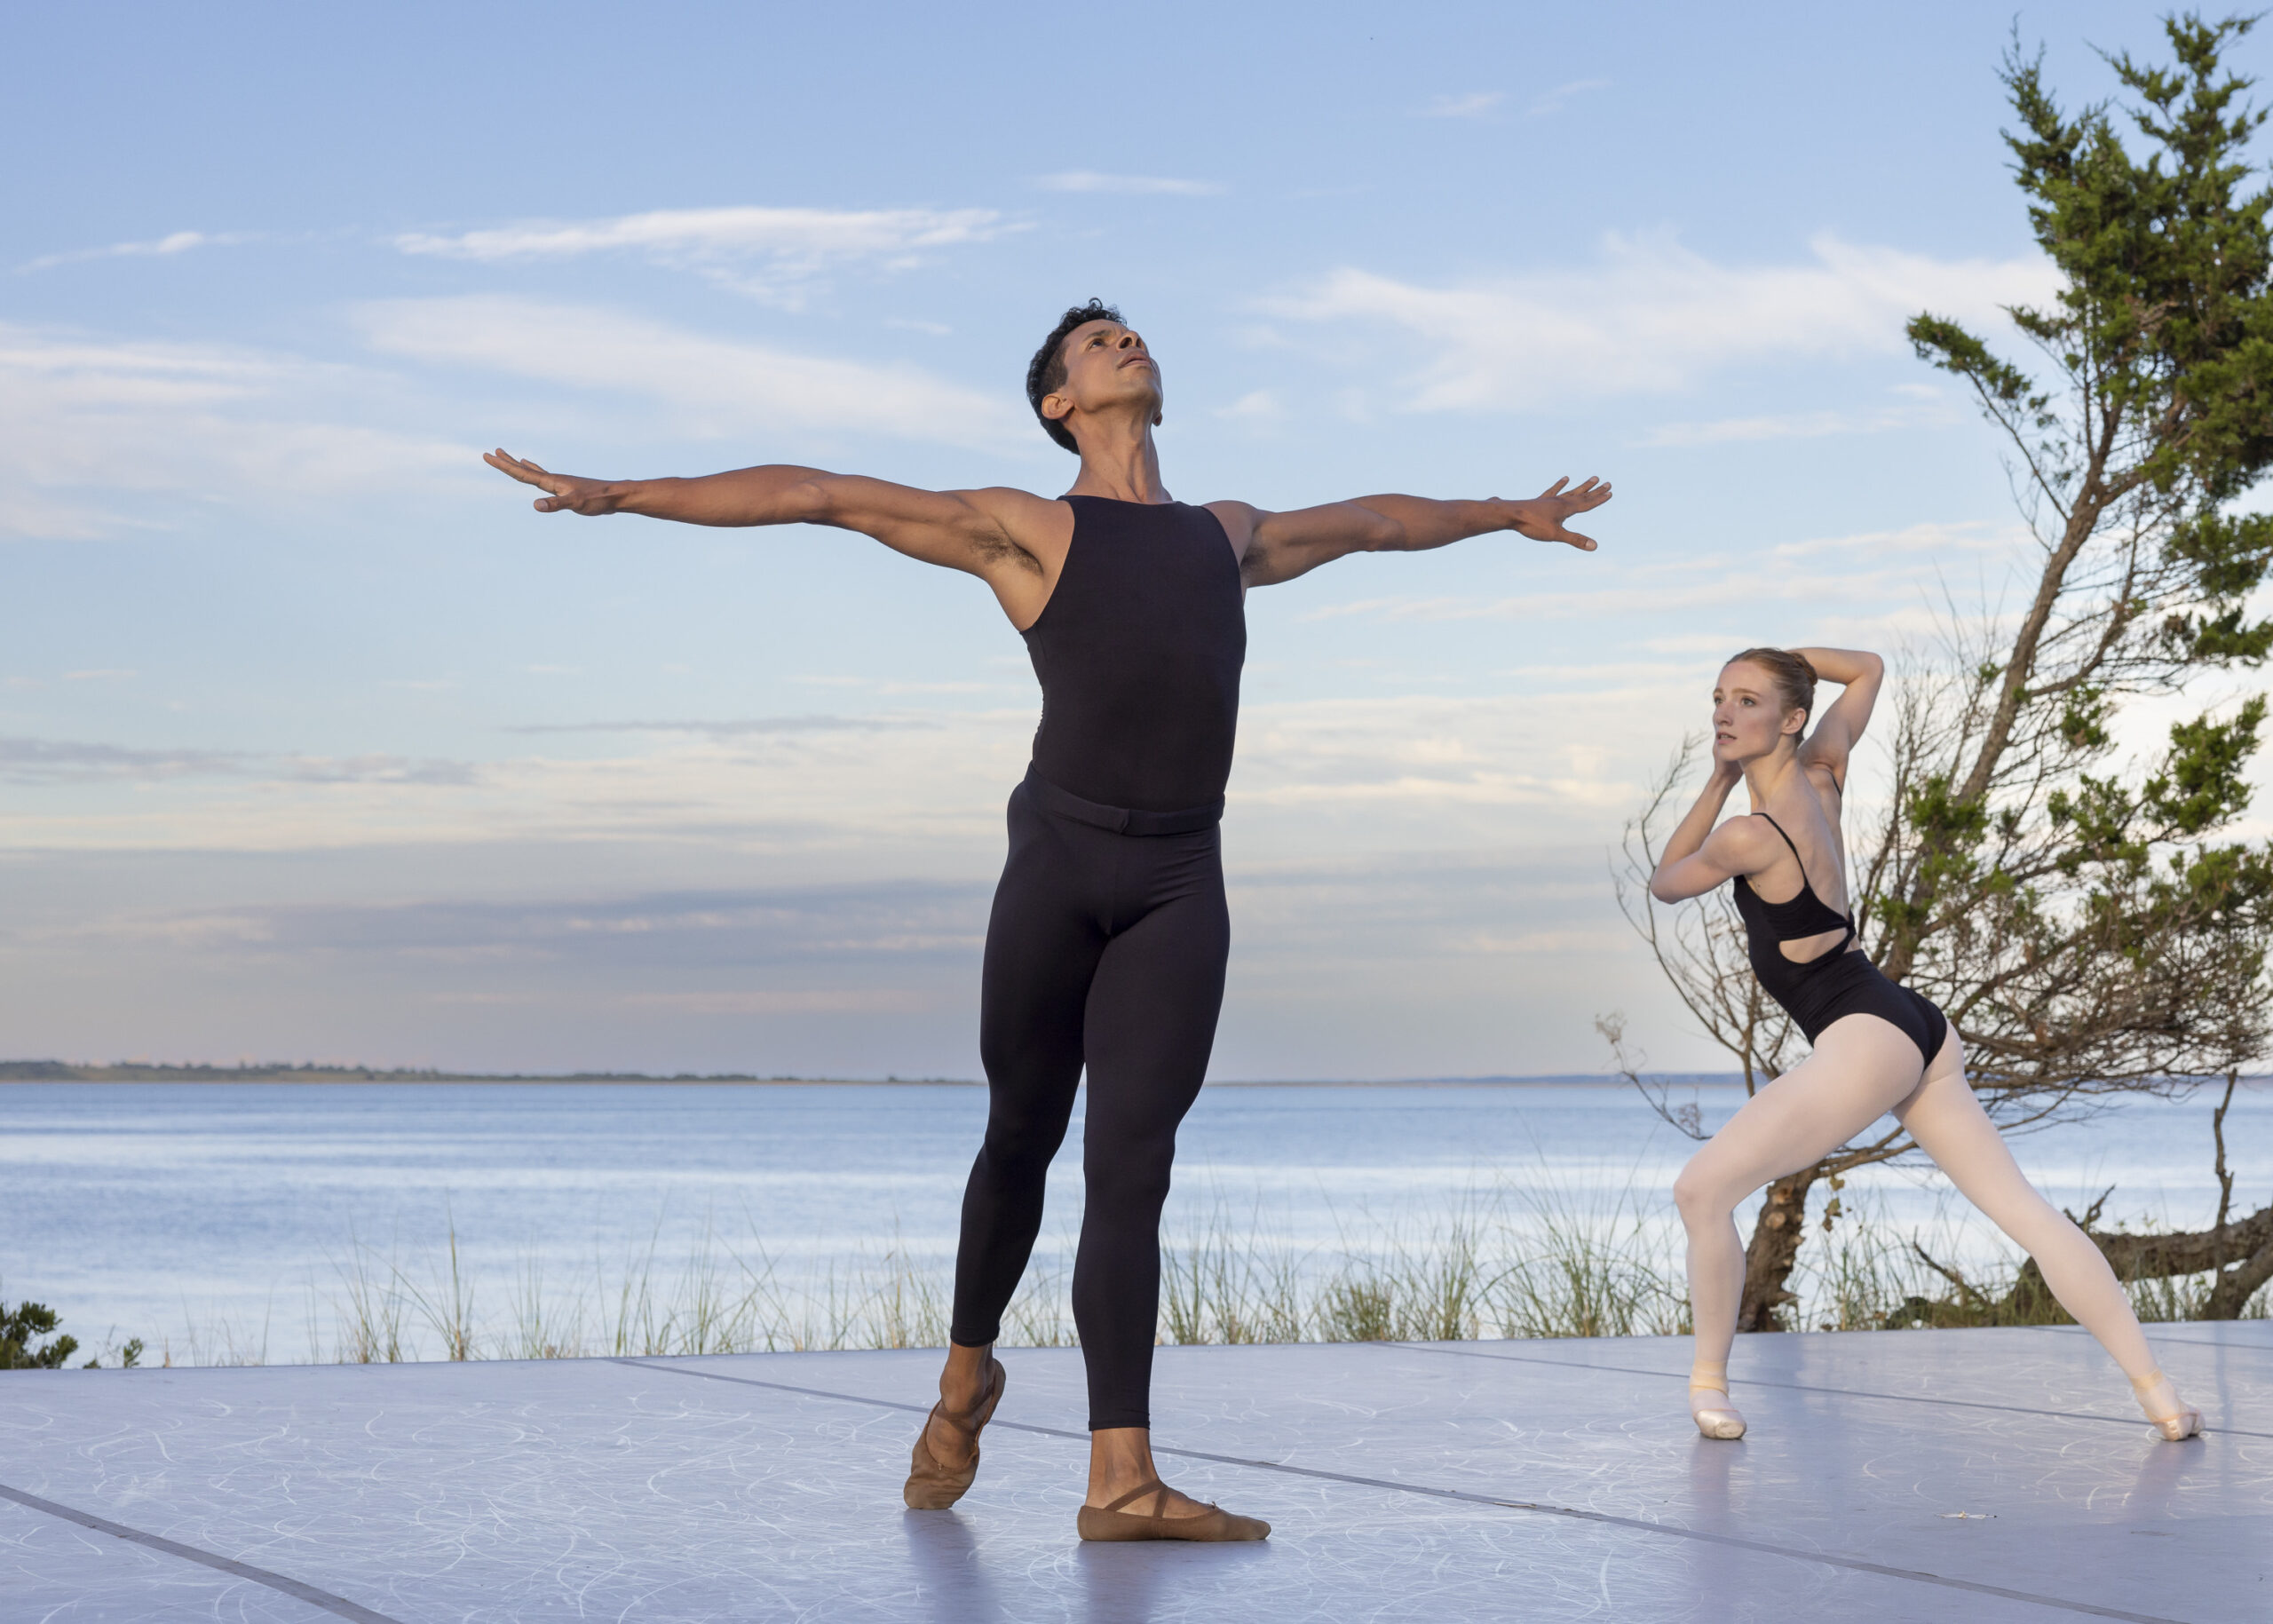 Jose Sebastian and Catherine Hurlin perform on a beautiful outdoor stage in front of a lake and blue sky at Hamptons Dance Project. Sebastian wears a black unitard, and Hurlin wears a black leotard with pink tights and pointe shoes.